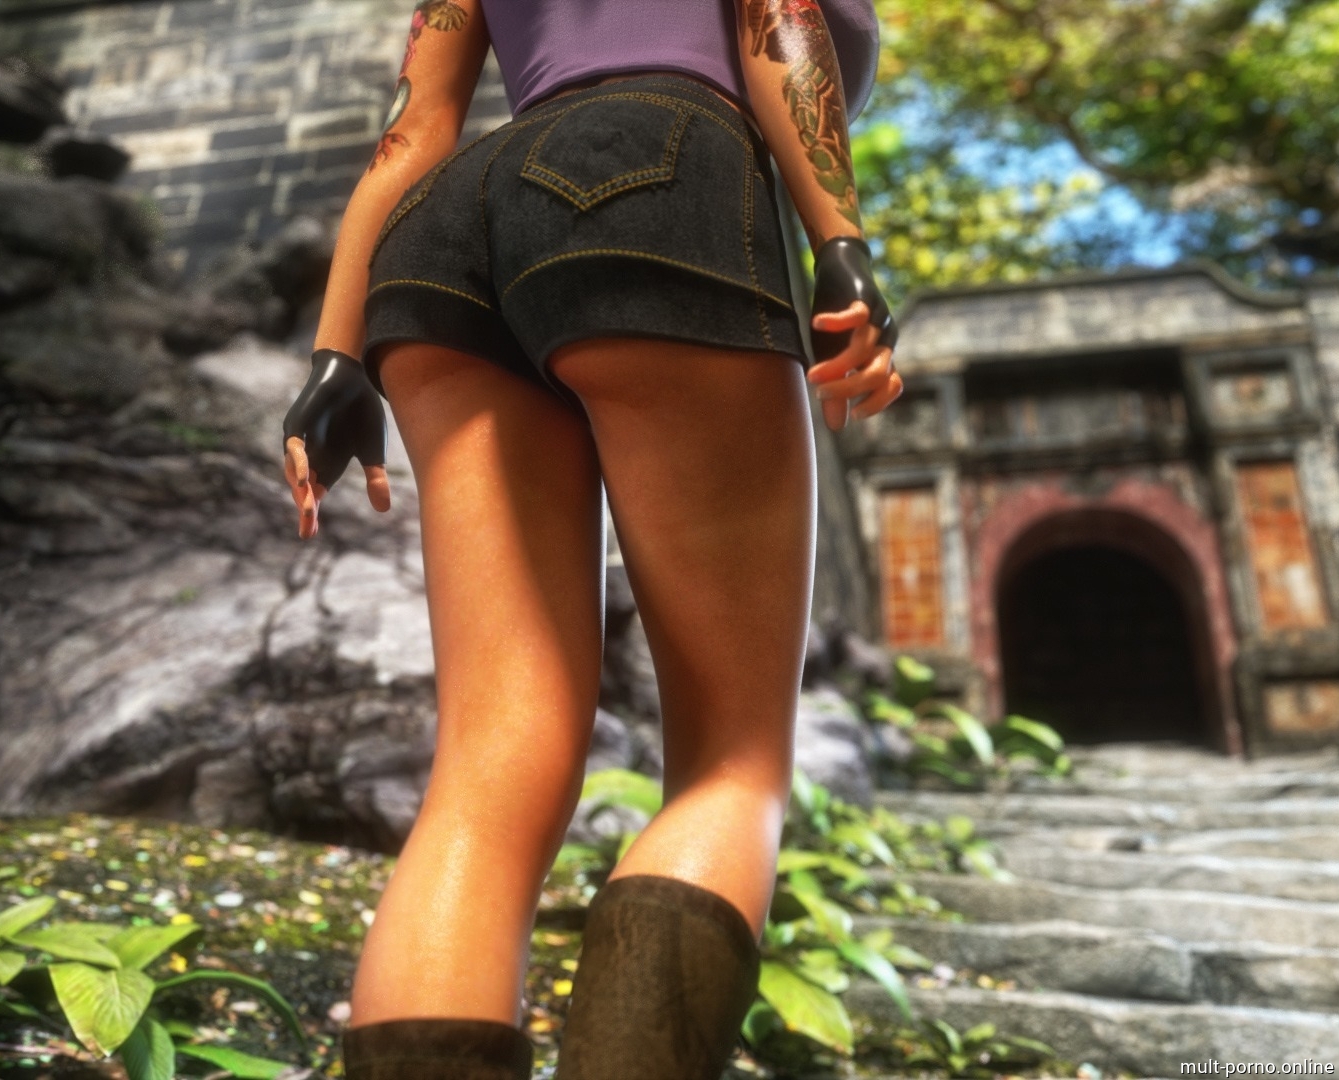 Monsters filled all of Lara Croft's holes with cum (Part 2) (+porn comics)